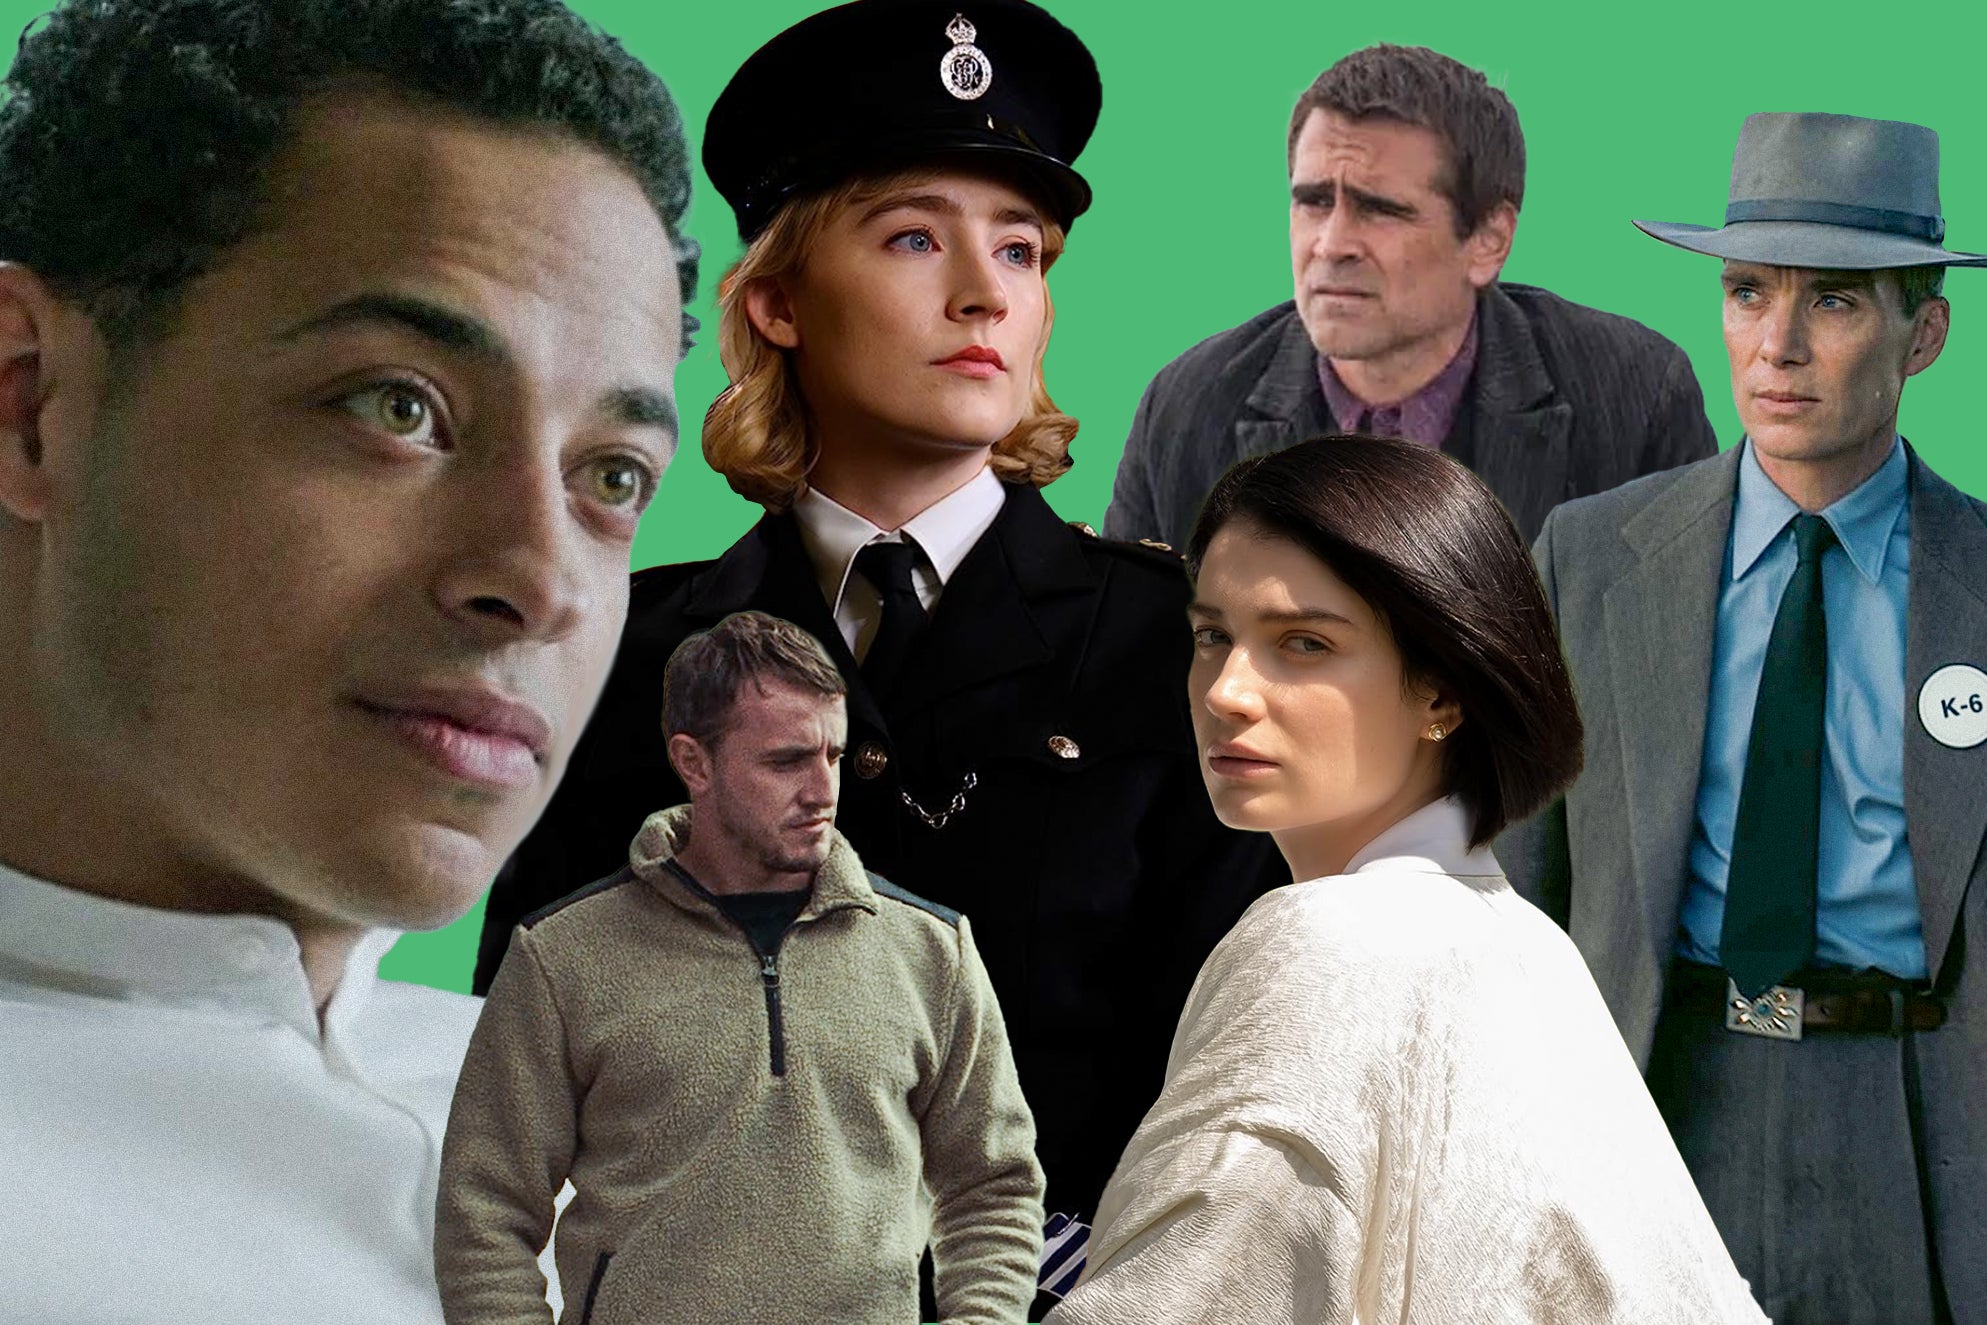 A collage of Irish actors including Saoirse Ronan, Paul Mescal, Colin Farrell, Cillian Murphy, and more.  